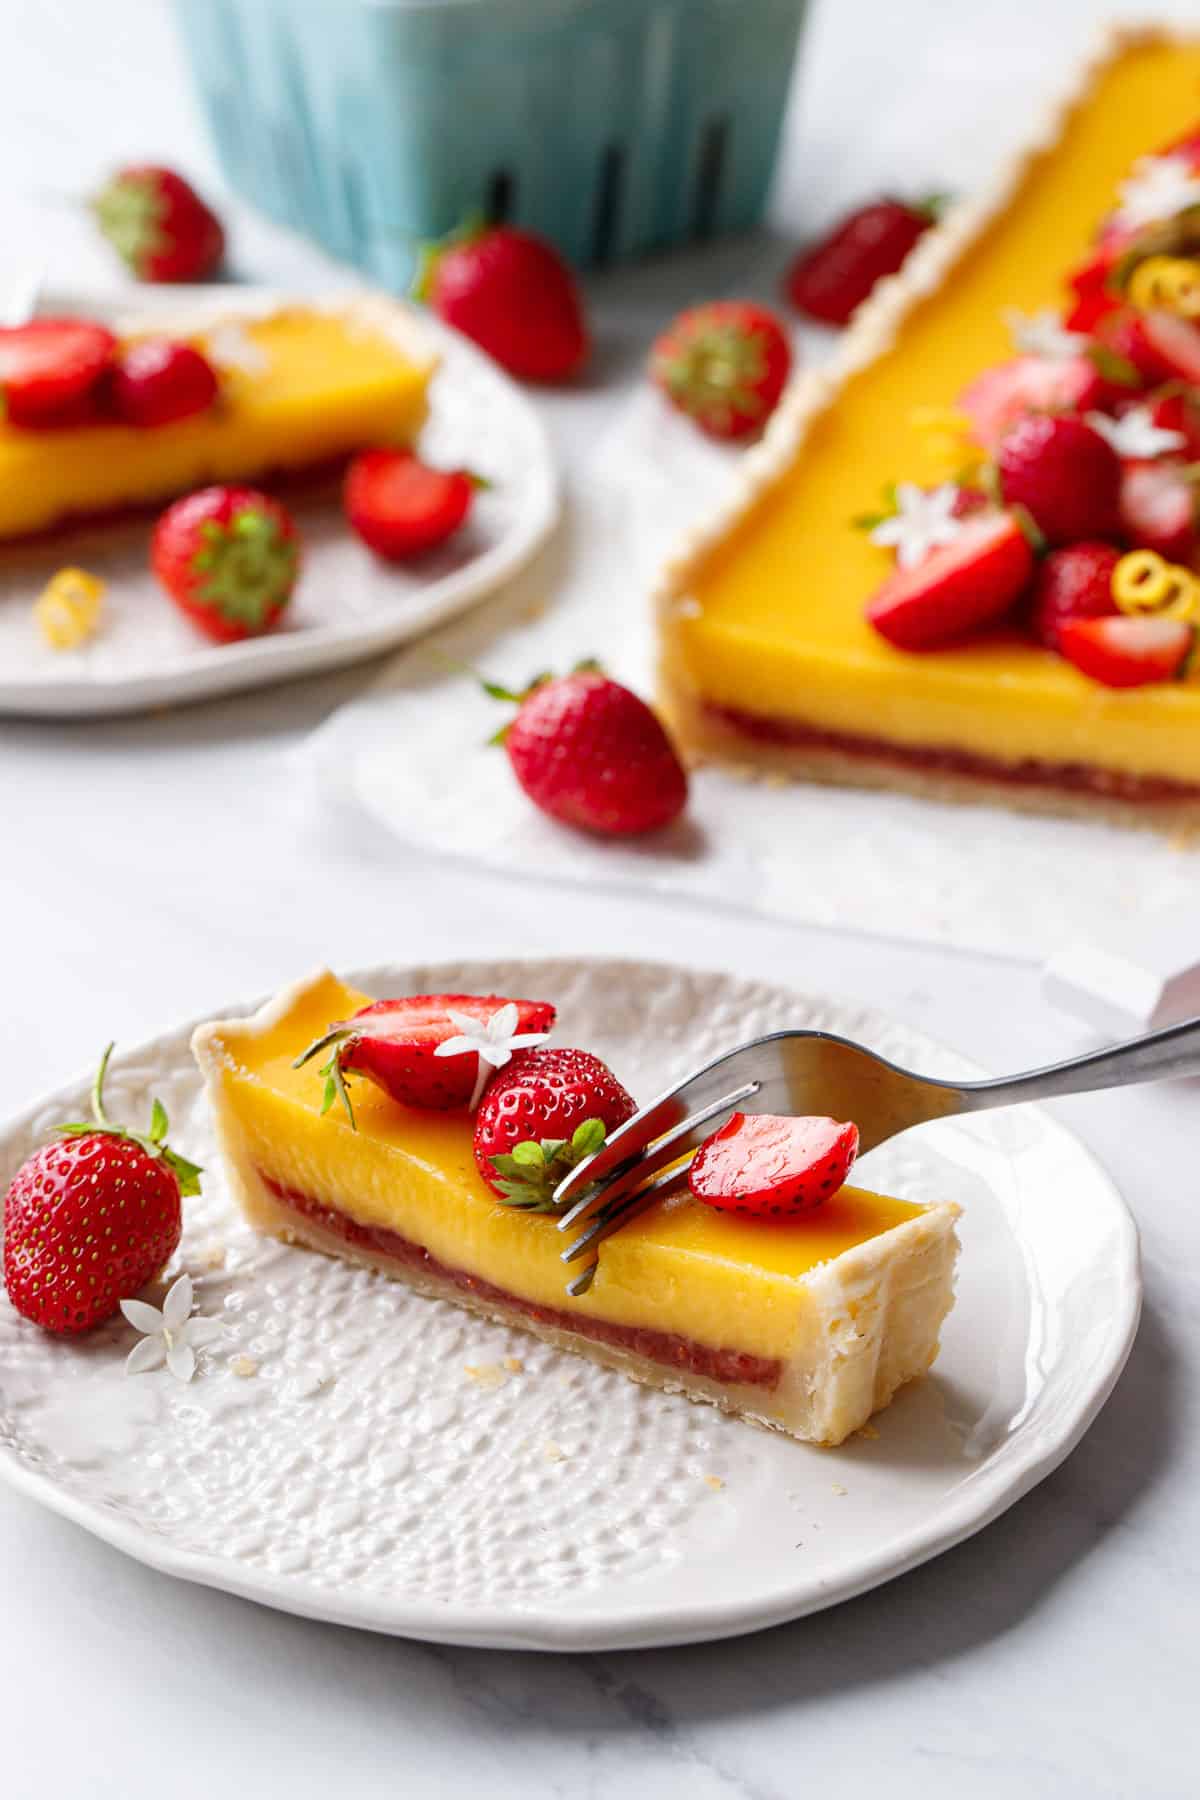 Fork cutting into a slice of Strawberry Meyer Lemon Tart, showing the soft texture of the meyer lemon curd and layer of strawberry jam underneath.